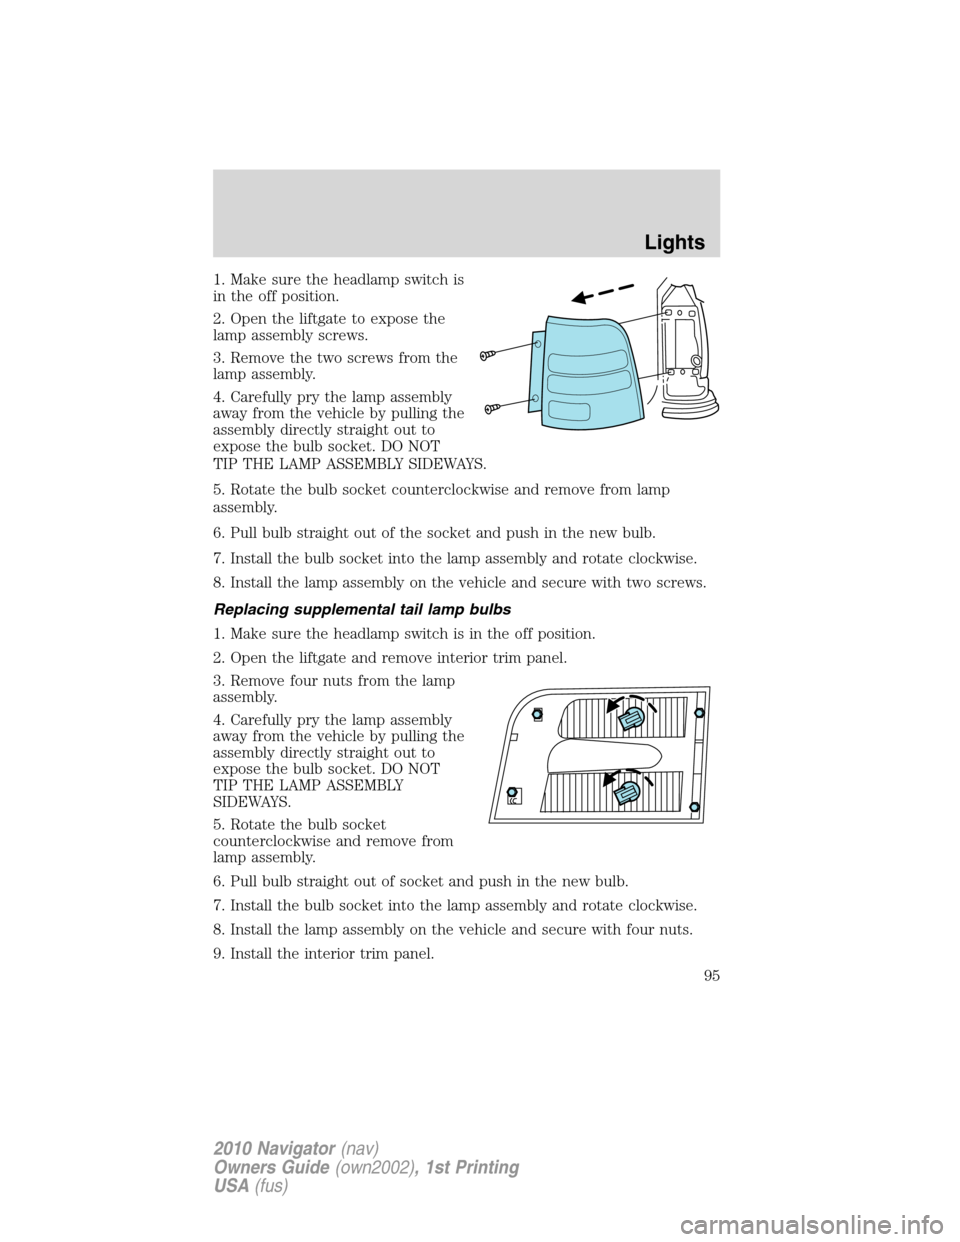 LINCOLN NAVIGATOR 2010  Owners Manual 1. Make sure the headlamp switch is
in the off position.
2. Open the liftgate to expose the
lamp assembly screws.
3. Remove the two screws from the
lamp assembly.
4. Carefully pry the lamp assembly
aw